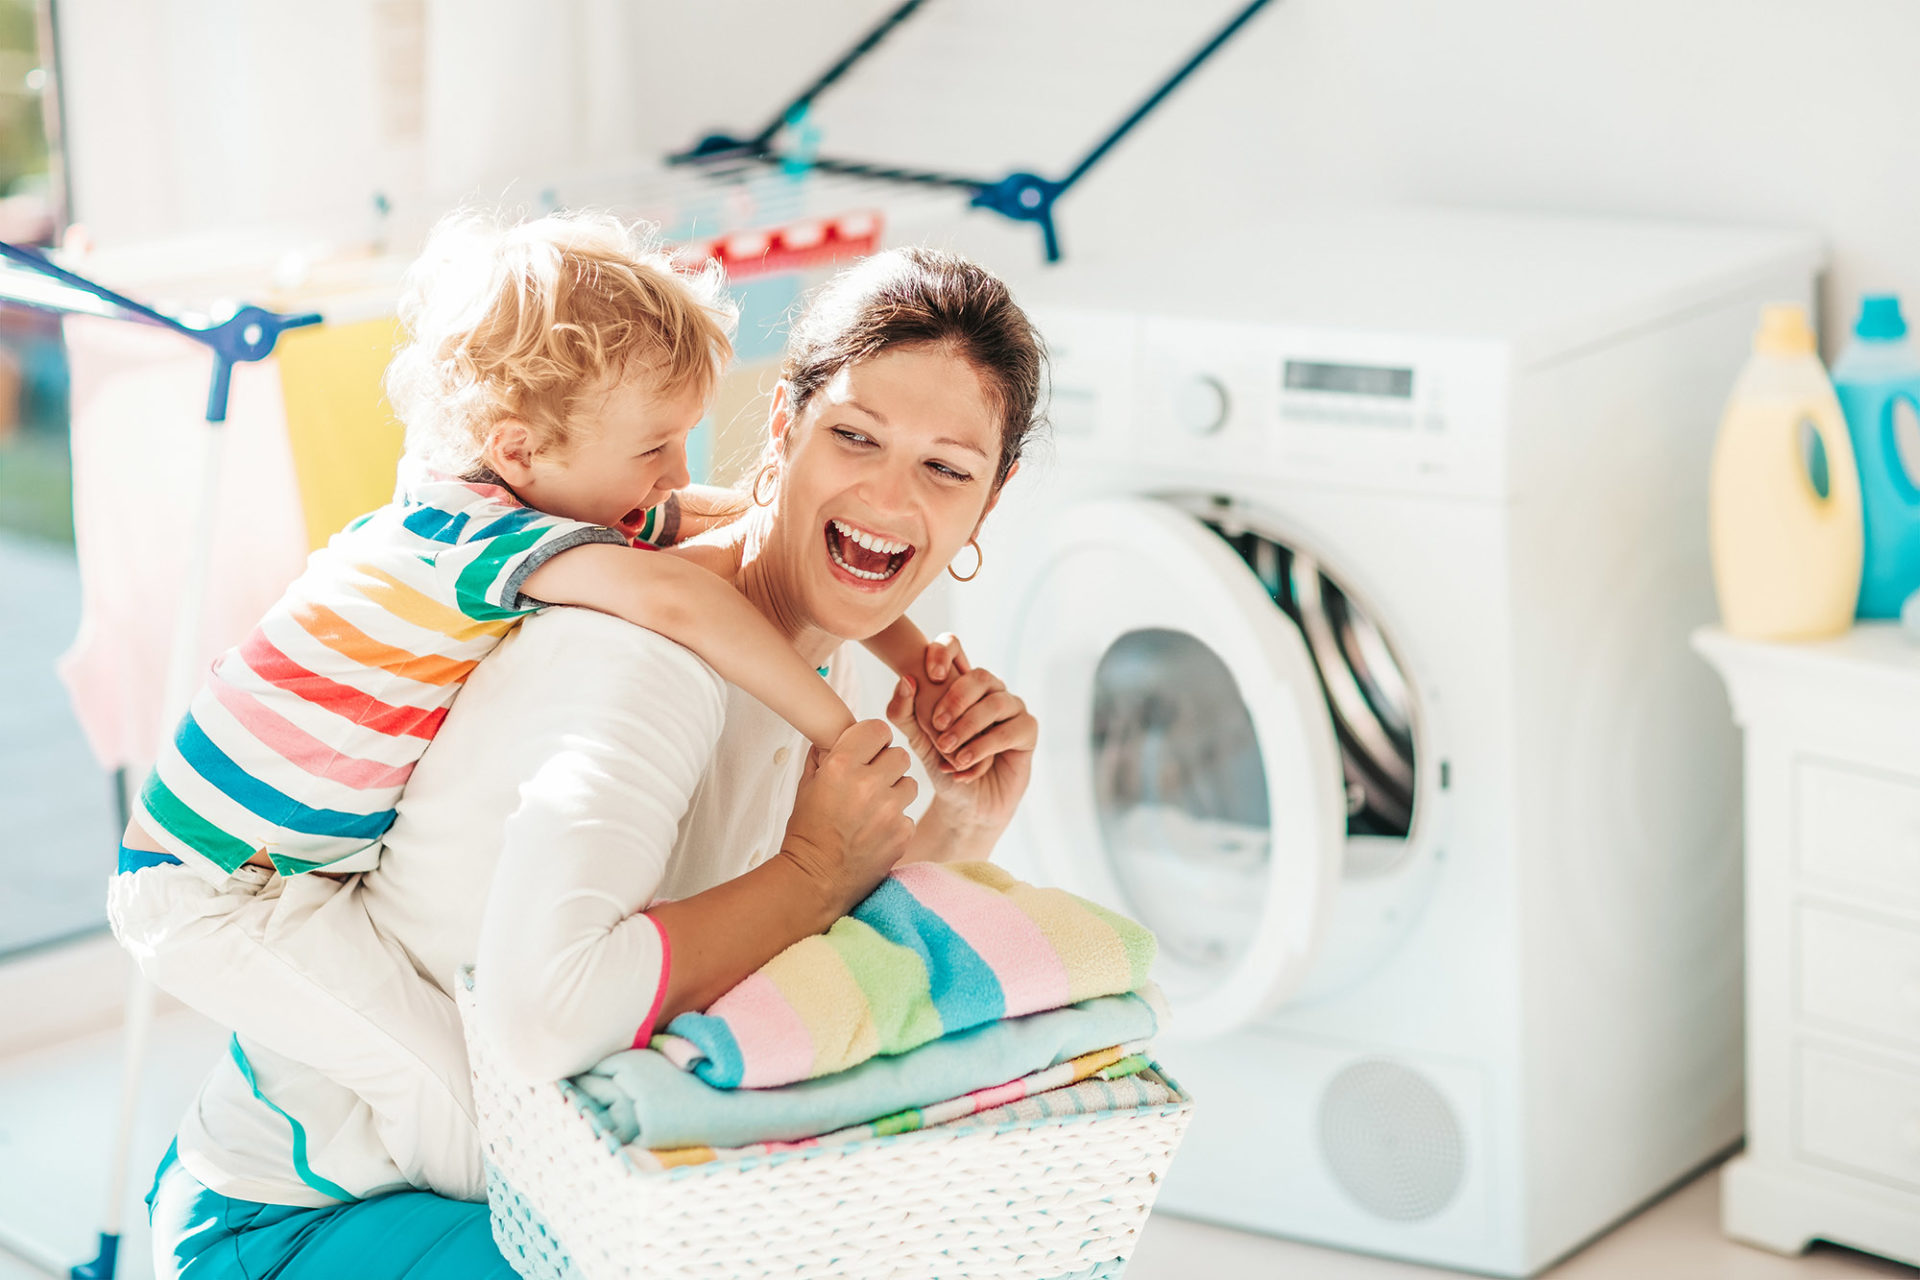 Laundry Room Essentials: Organizing Must Haves